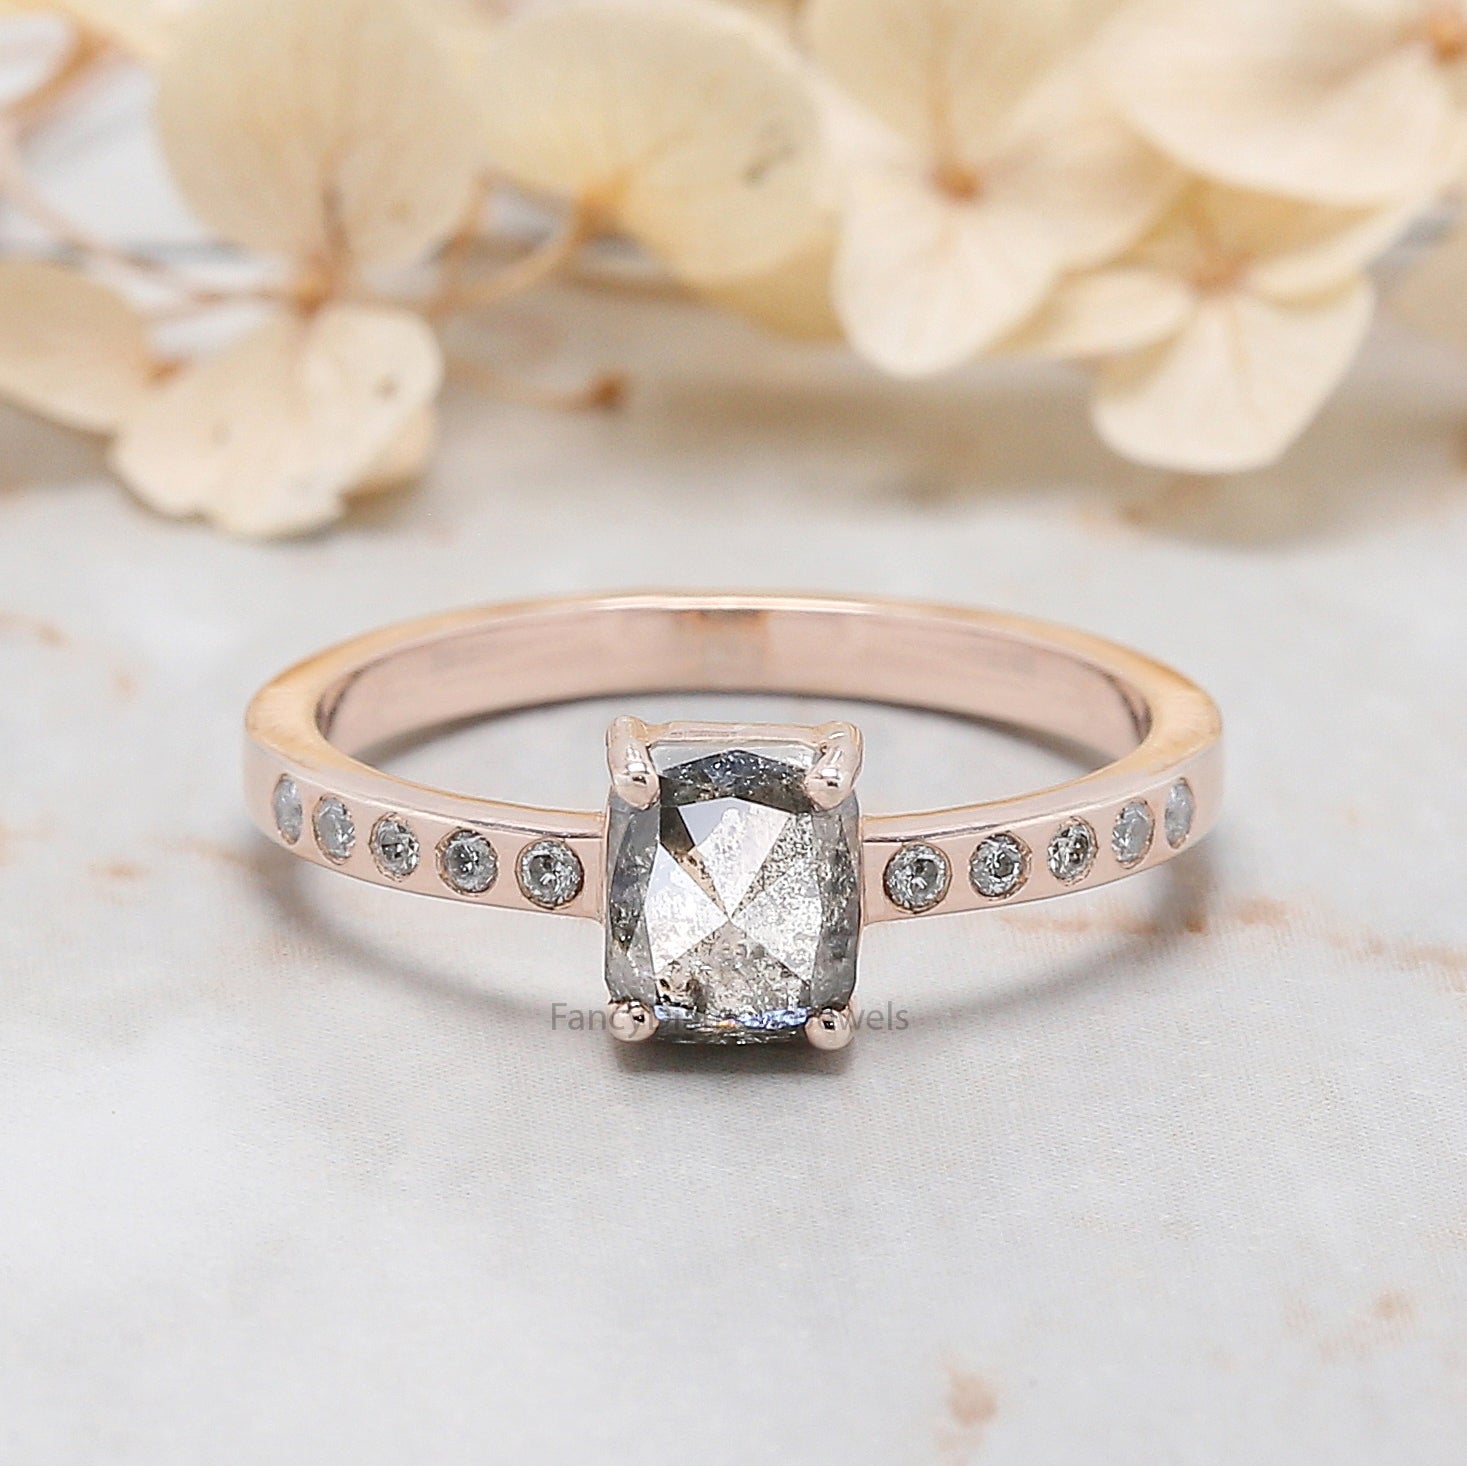 Cushion Cut Salt And Pepper Diamond Ring 0.86 Ct 5.95 MM Cushion Diamond Ring 14K Rose Gold Silver Engagement Ring Gift For Her QL7859